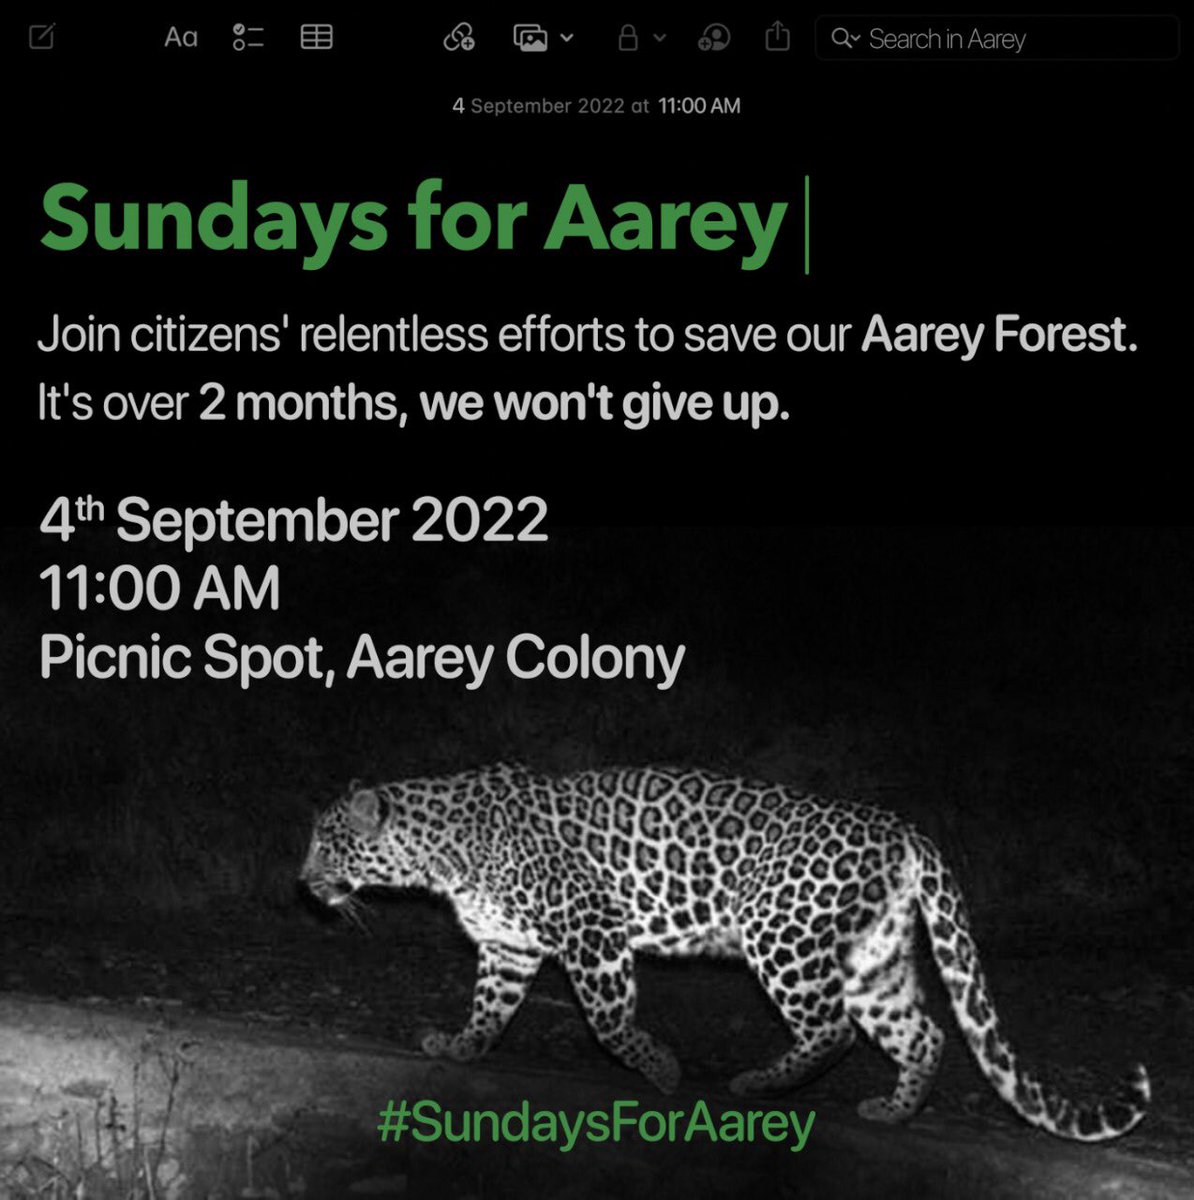 We will continue to voice our opinion to Save Aarey Forest untill it gets Saved. 

Show up tomorrow at 11am At Aarey Forest.
#SaveAareyForest 

#Aarey #DontKillMumbai #SaveMumbai #Mumbai #Thane #Powai #SaveSGNP #SavePowaiLake #Metro #Metrocarshed